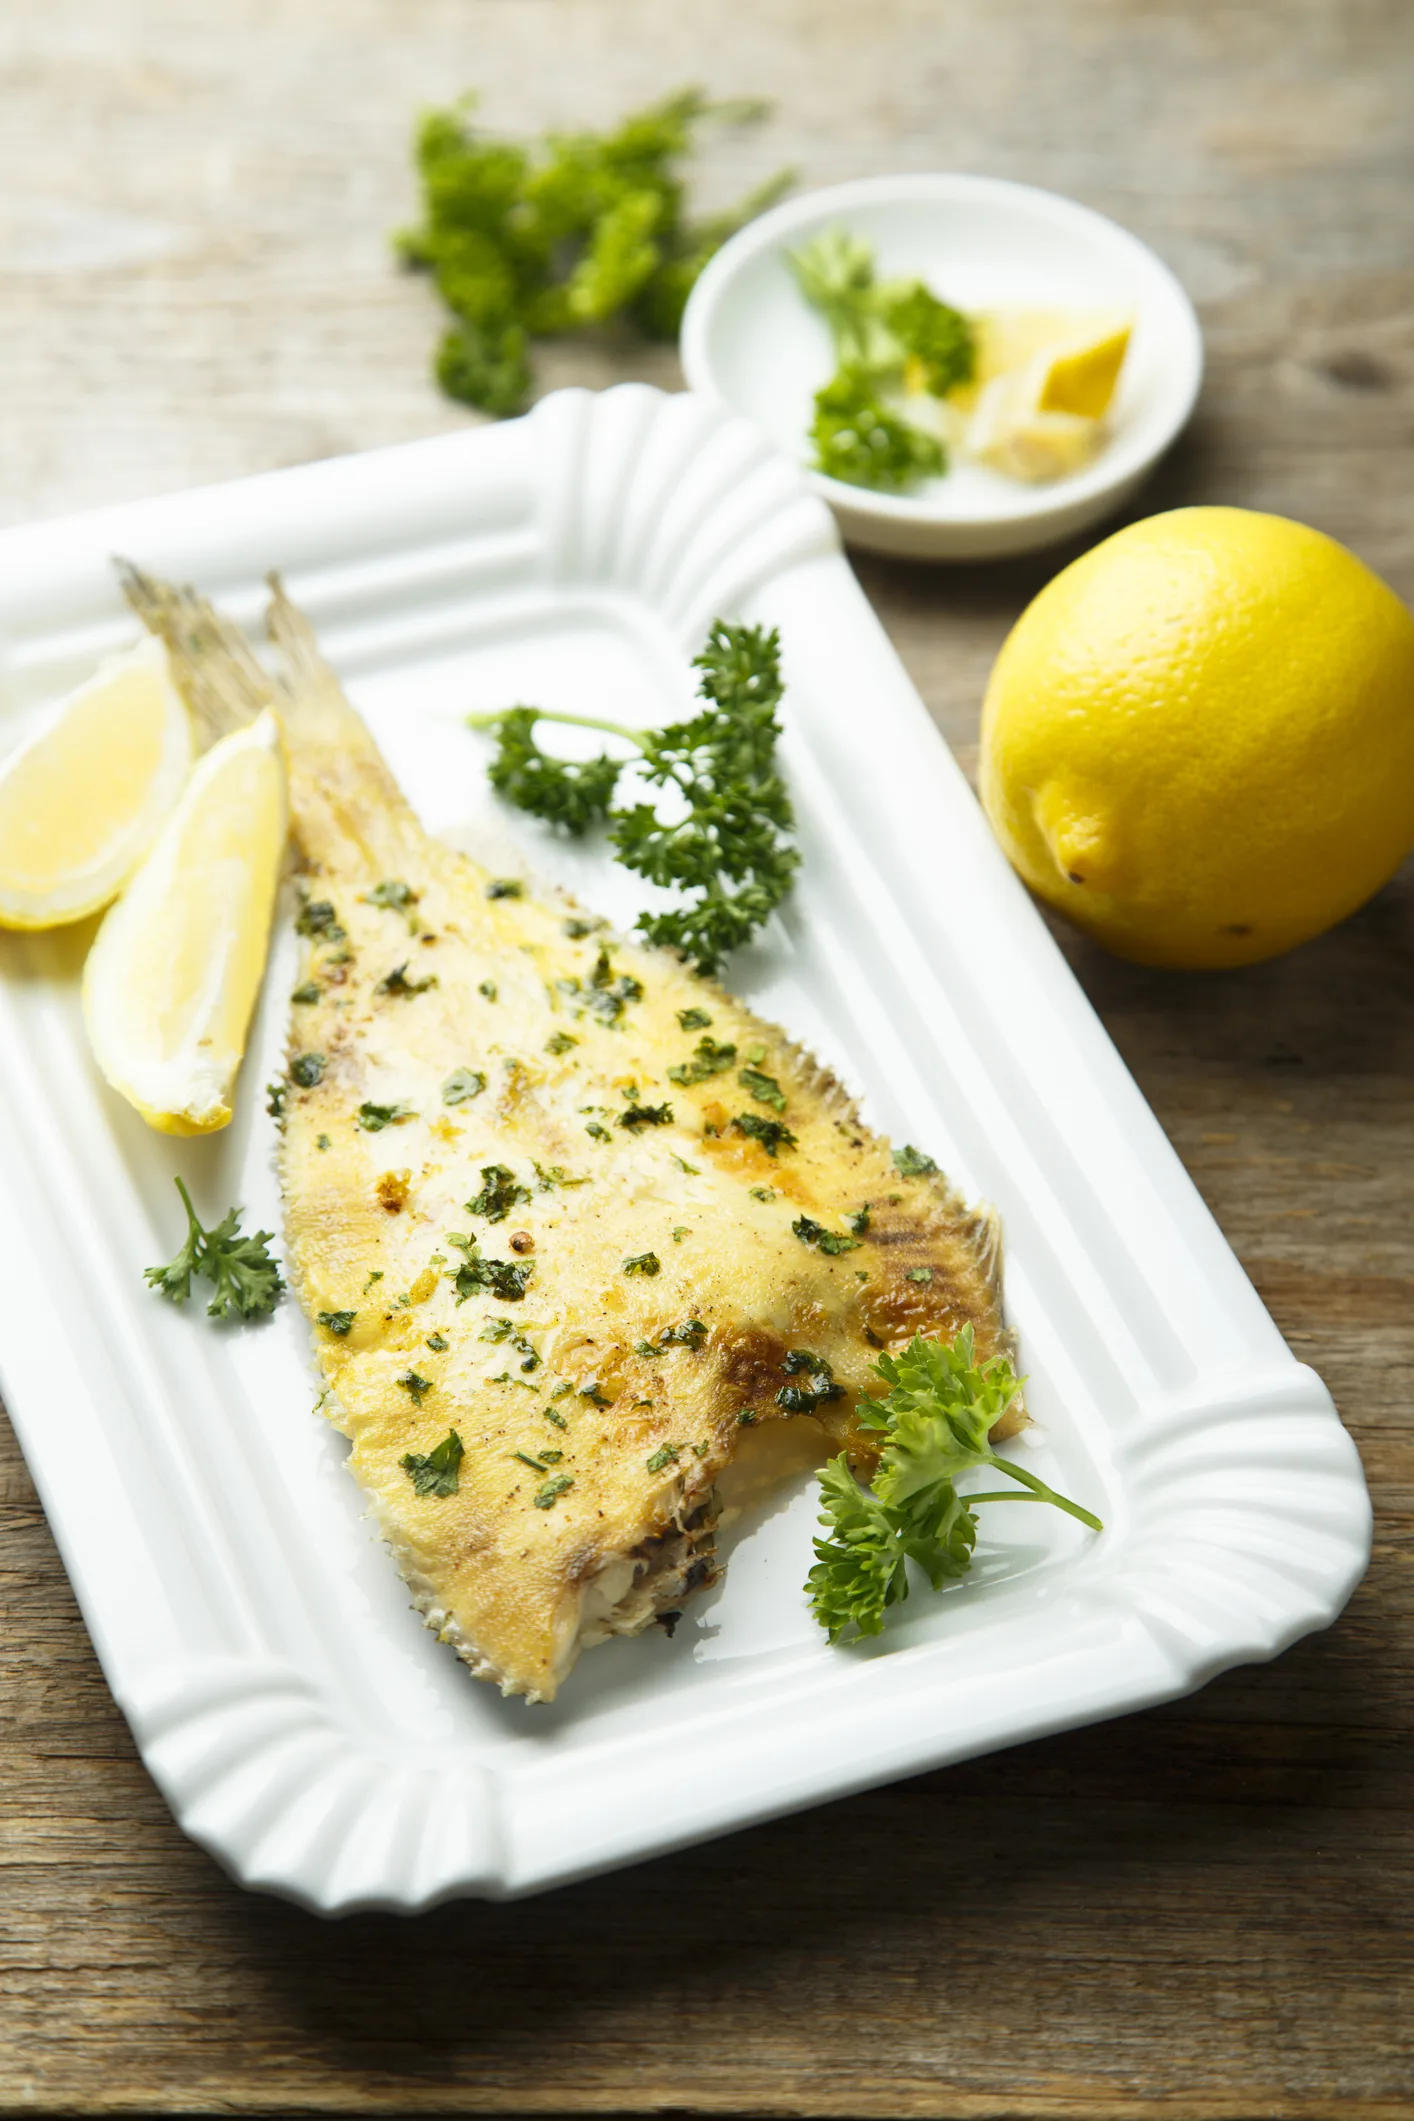 Recipe of the day: Easy lemon butter fish